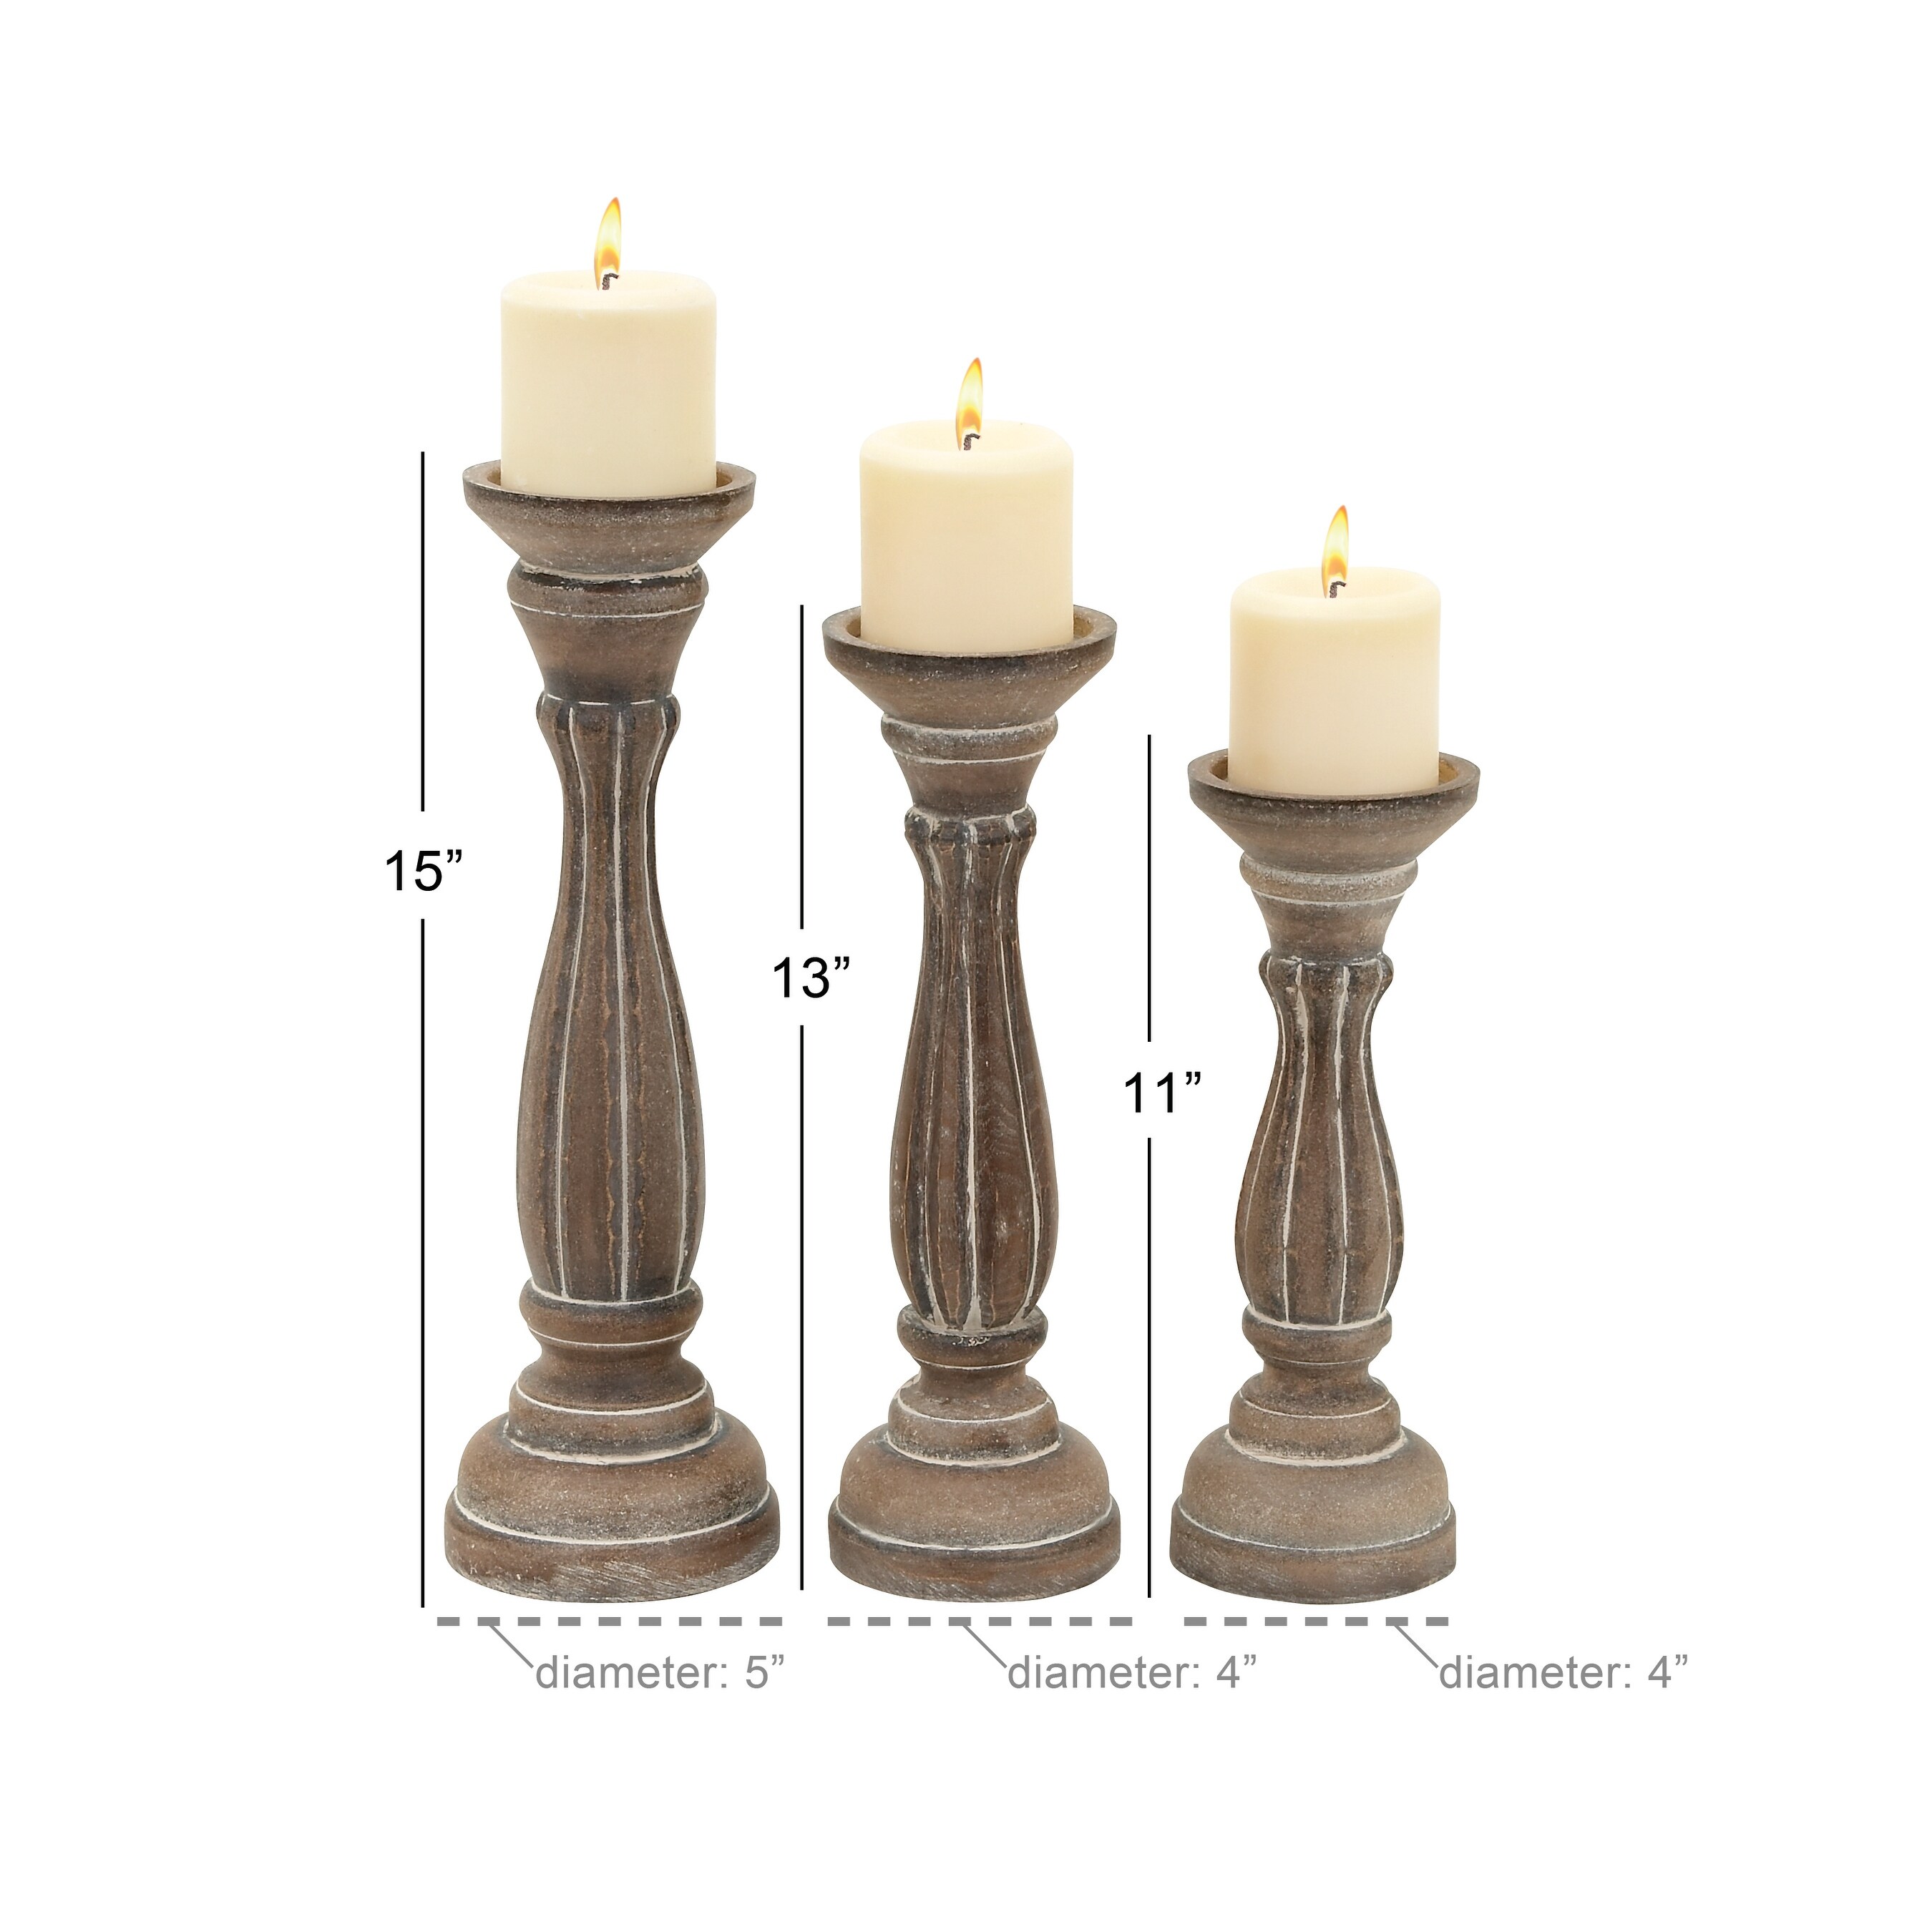 Pine Traditional Candle Holder (Set of 3) - S/3 15", 13", 11"H